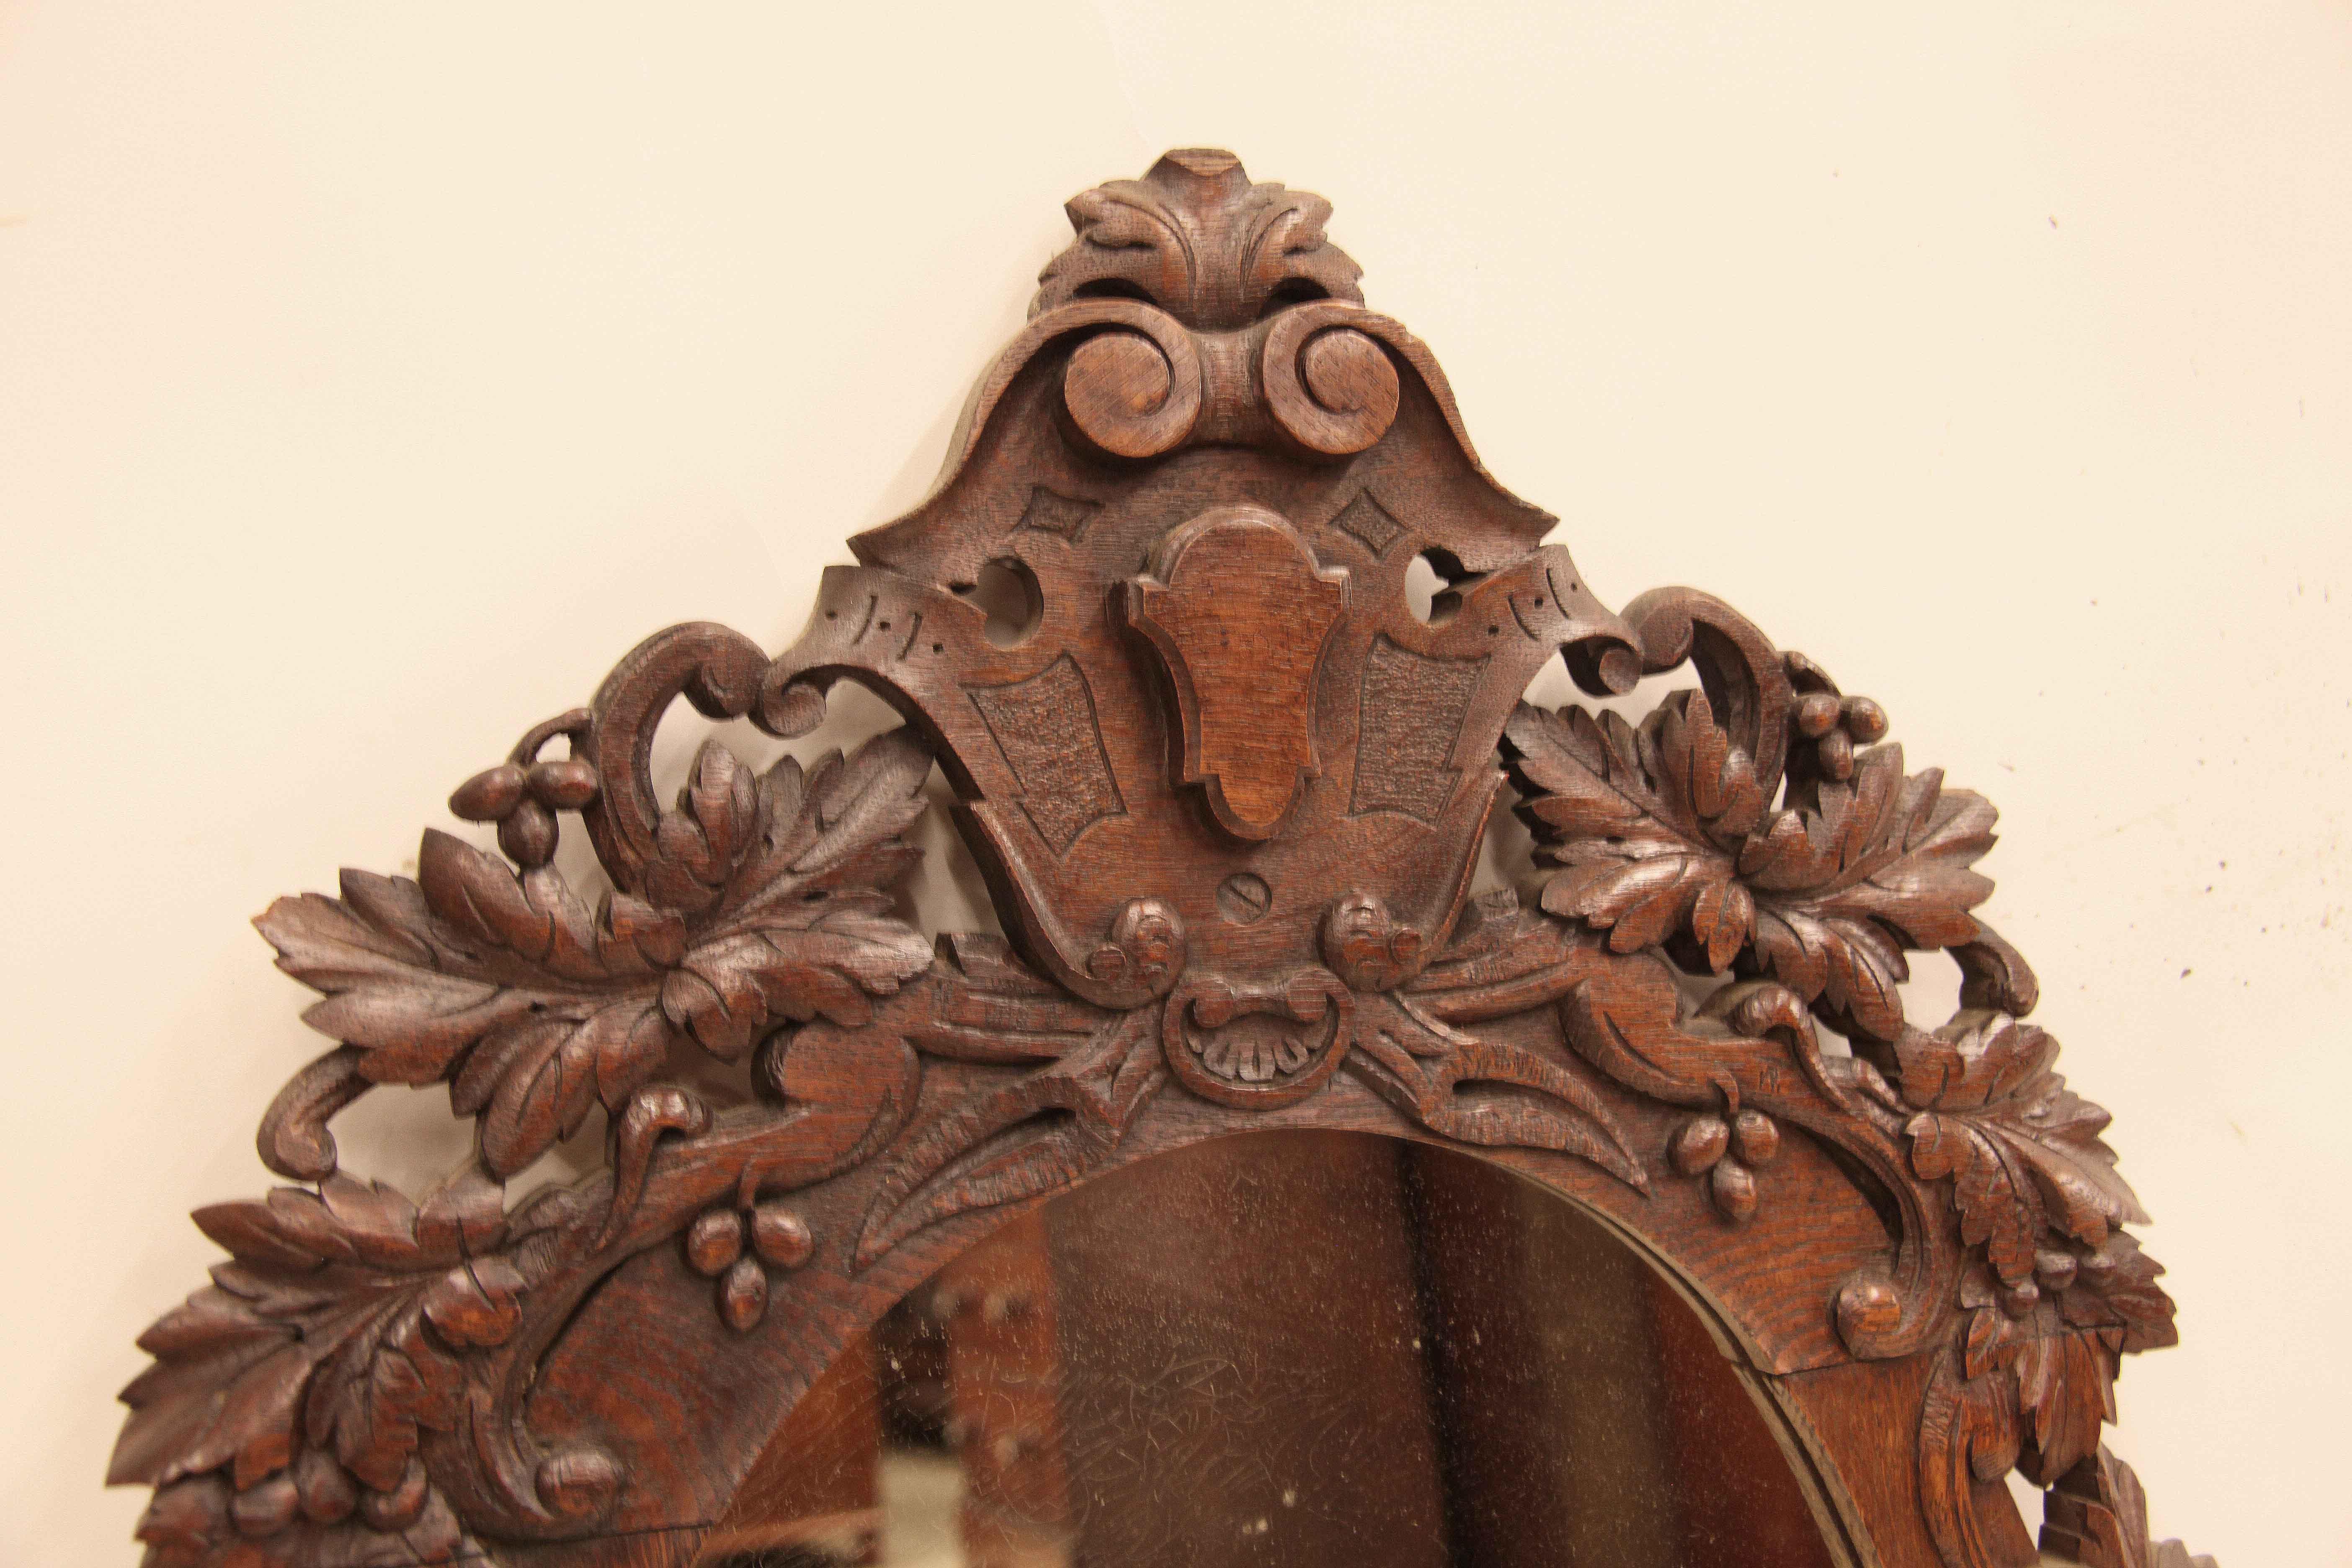 English carved oak oval mirror with carved shield at the top , the entire perimeter features leaf and grape carving in high relief connected with arabesques.  The mirror is original as well as the beautiful color and patina.